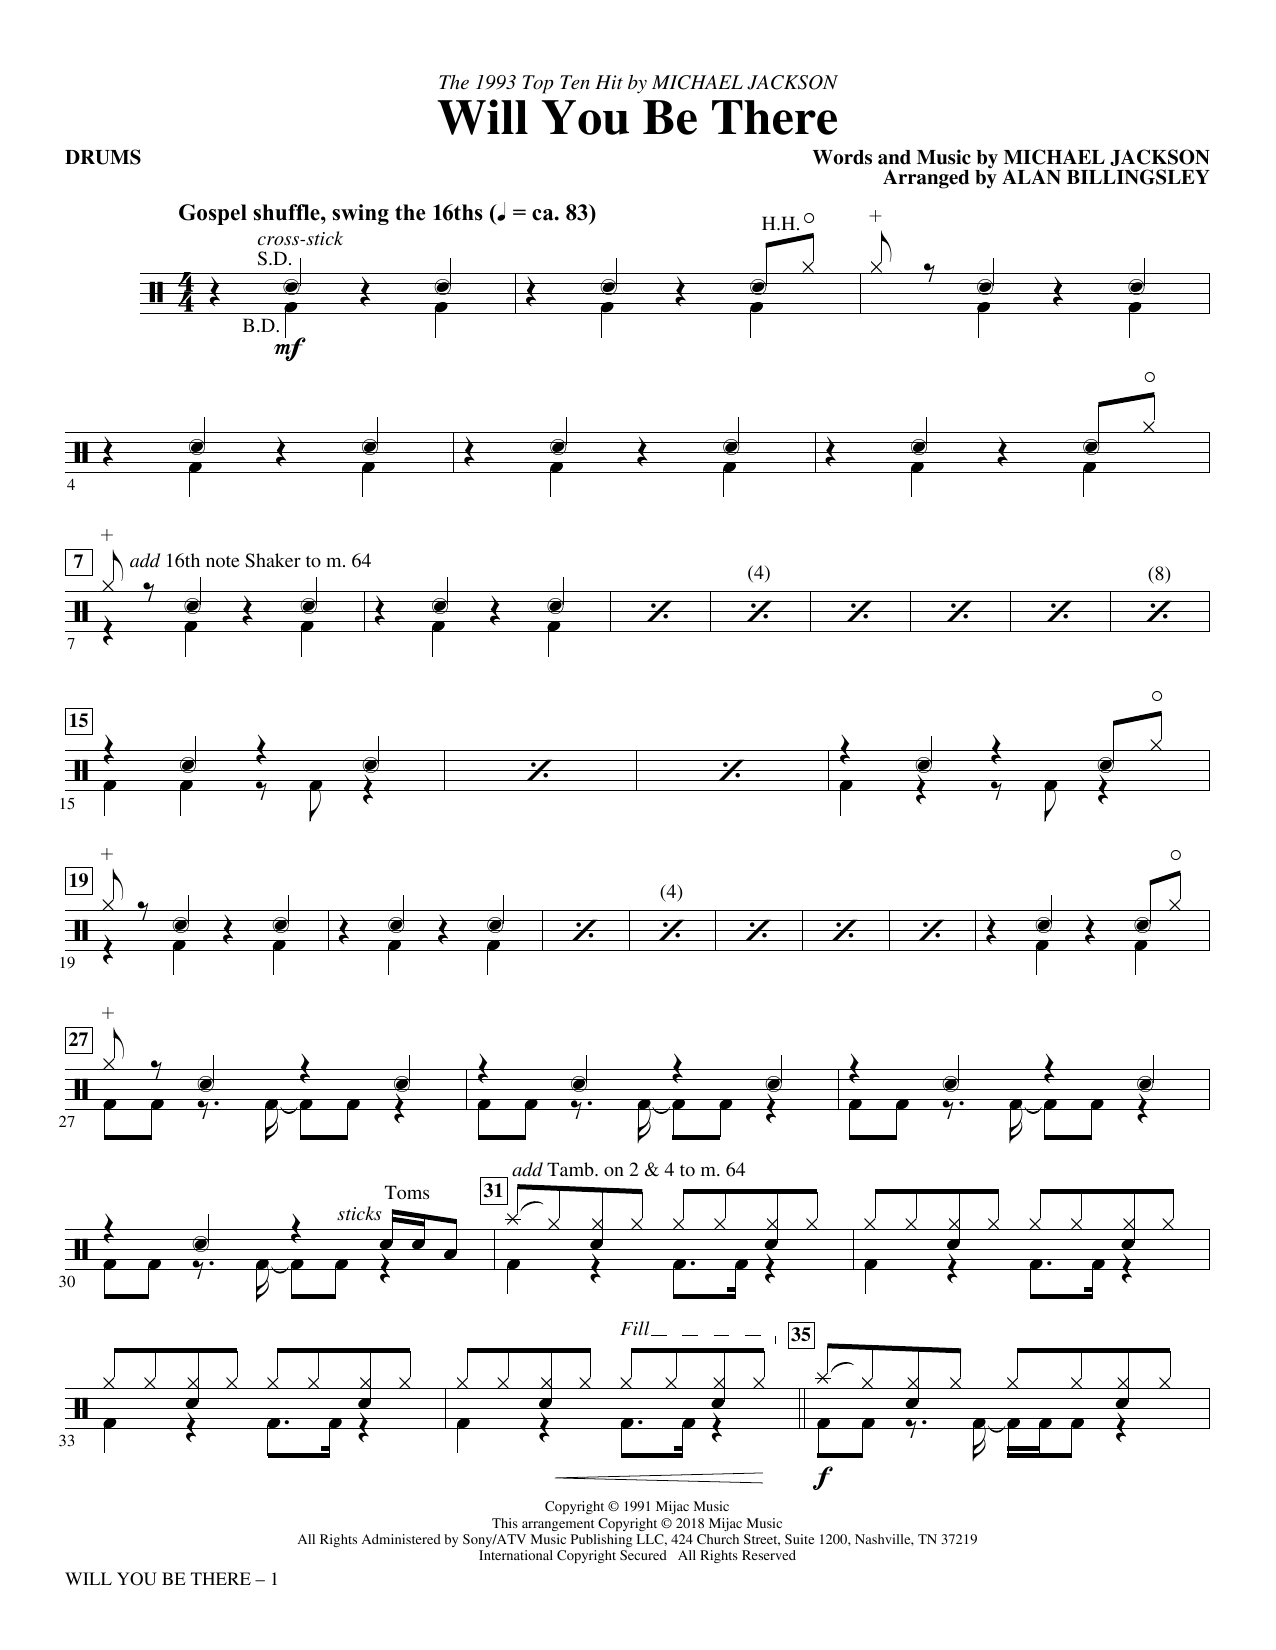 Will You Be There - Drums sheet music